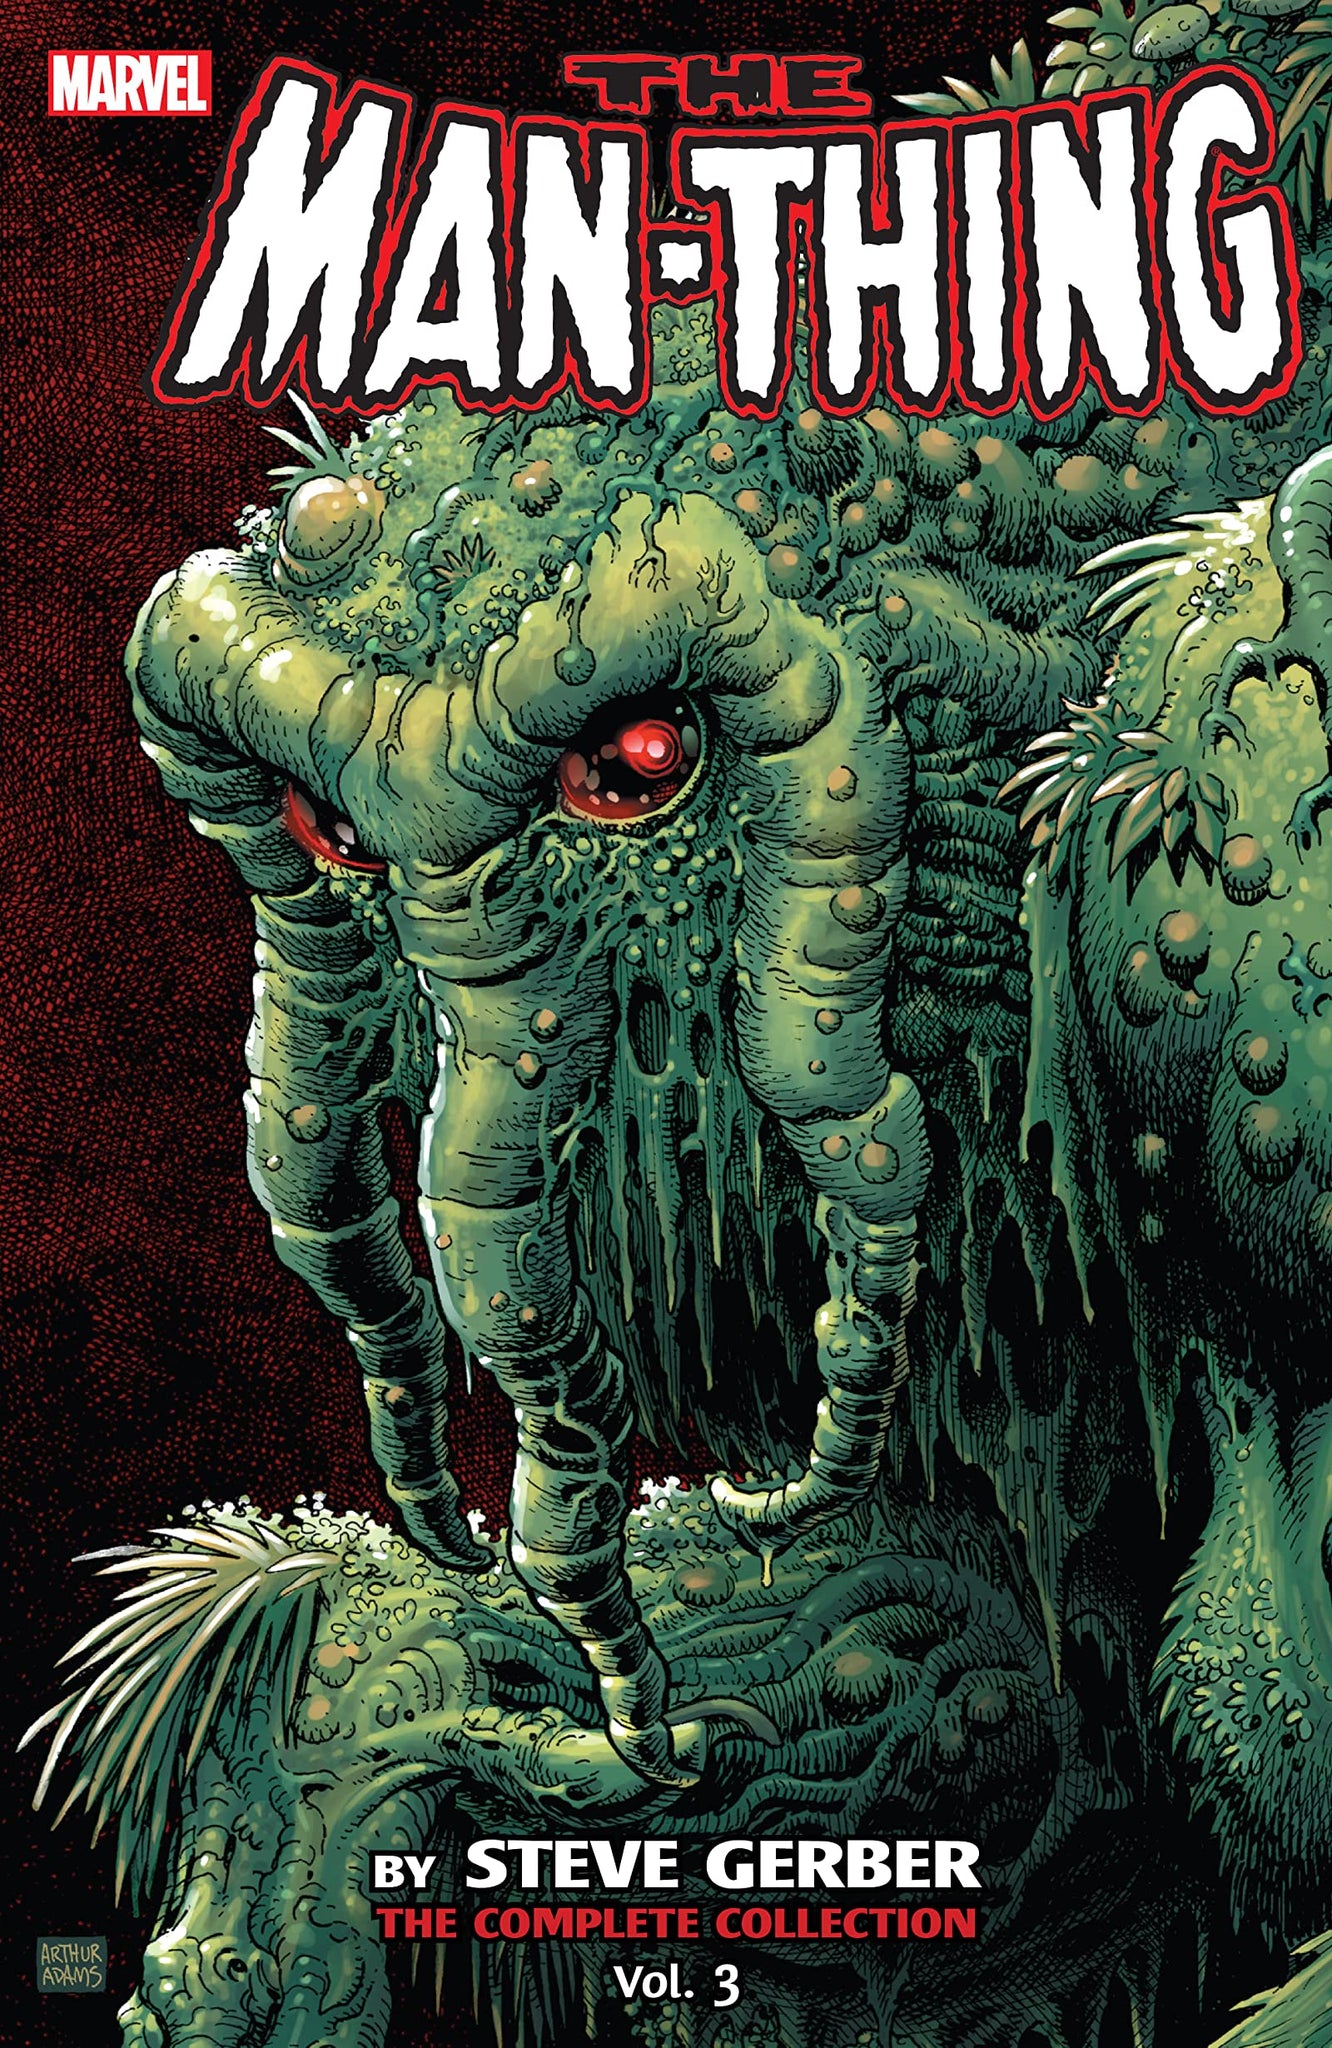 Man-Thing by Steve Gerber - The Complete Collection Volume 3